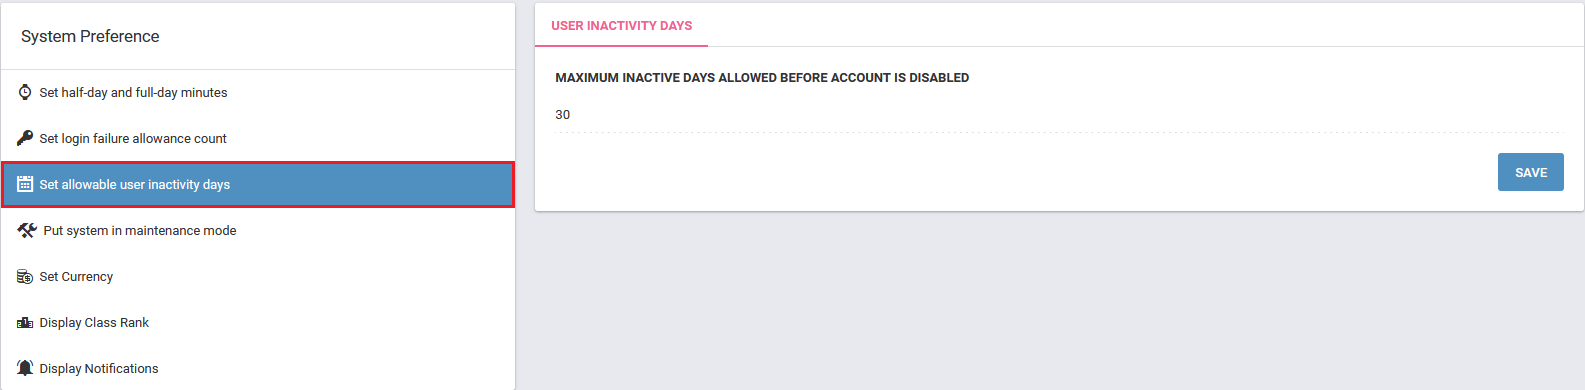 inactive_logindays.png